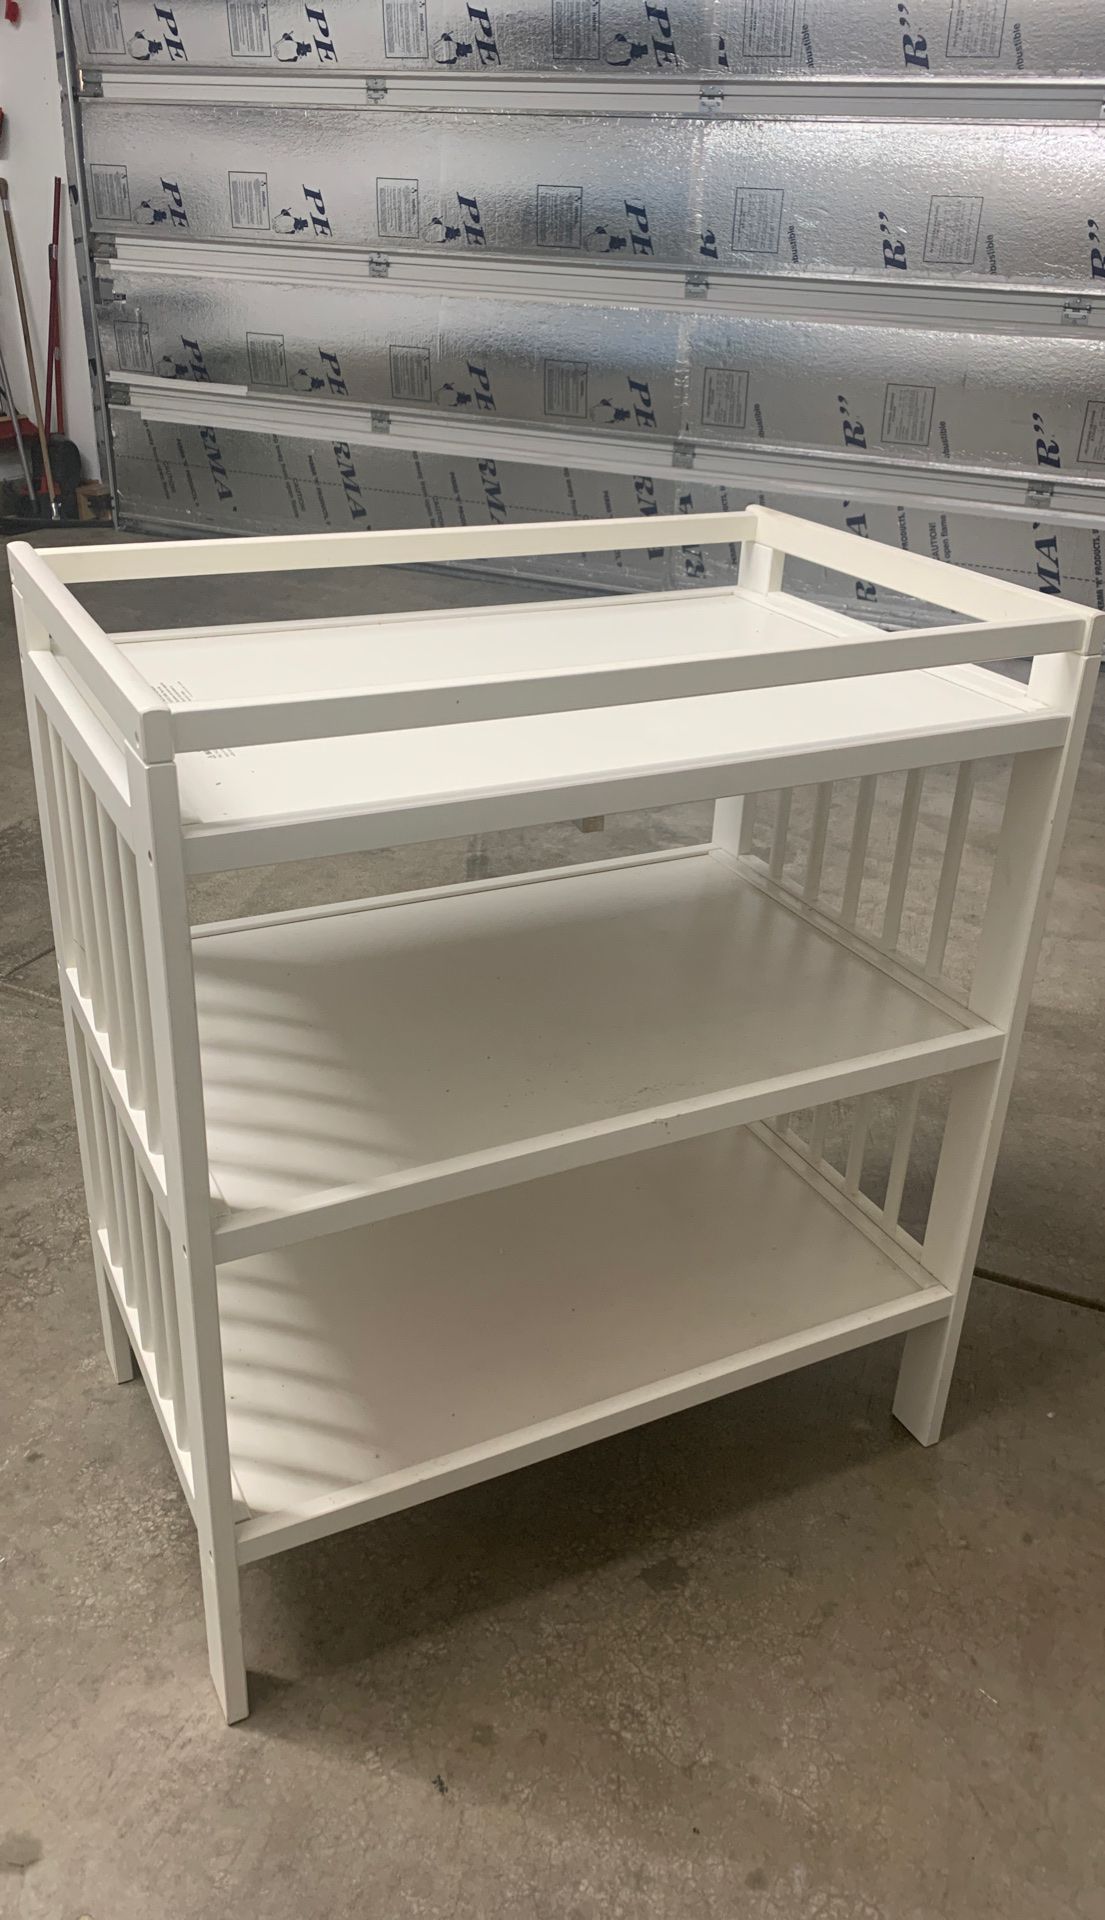 Diaper changing Table